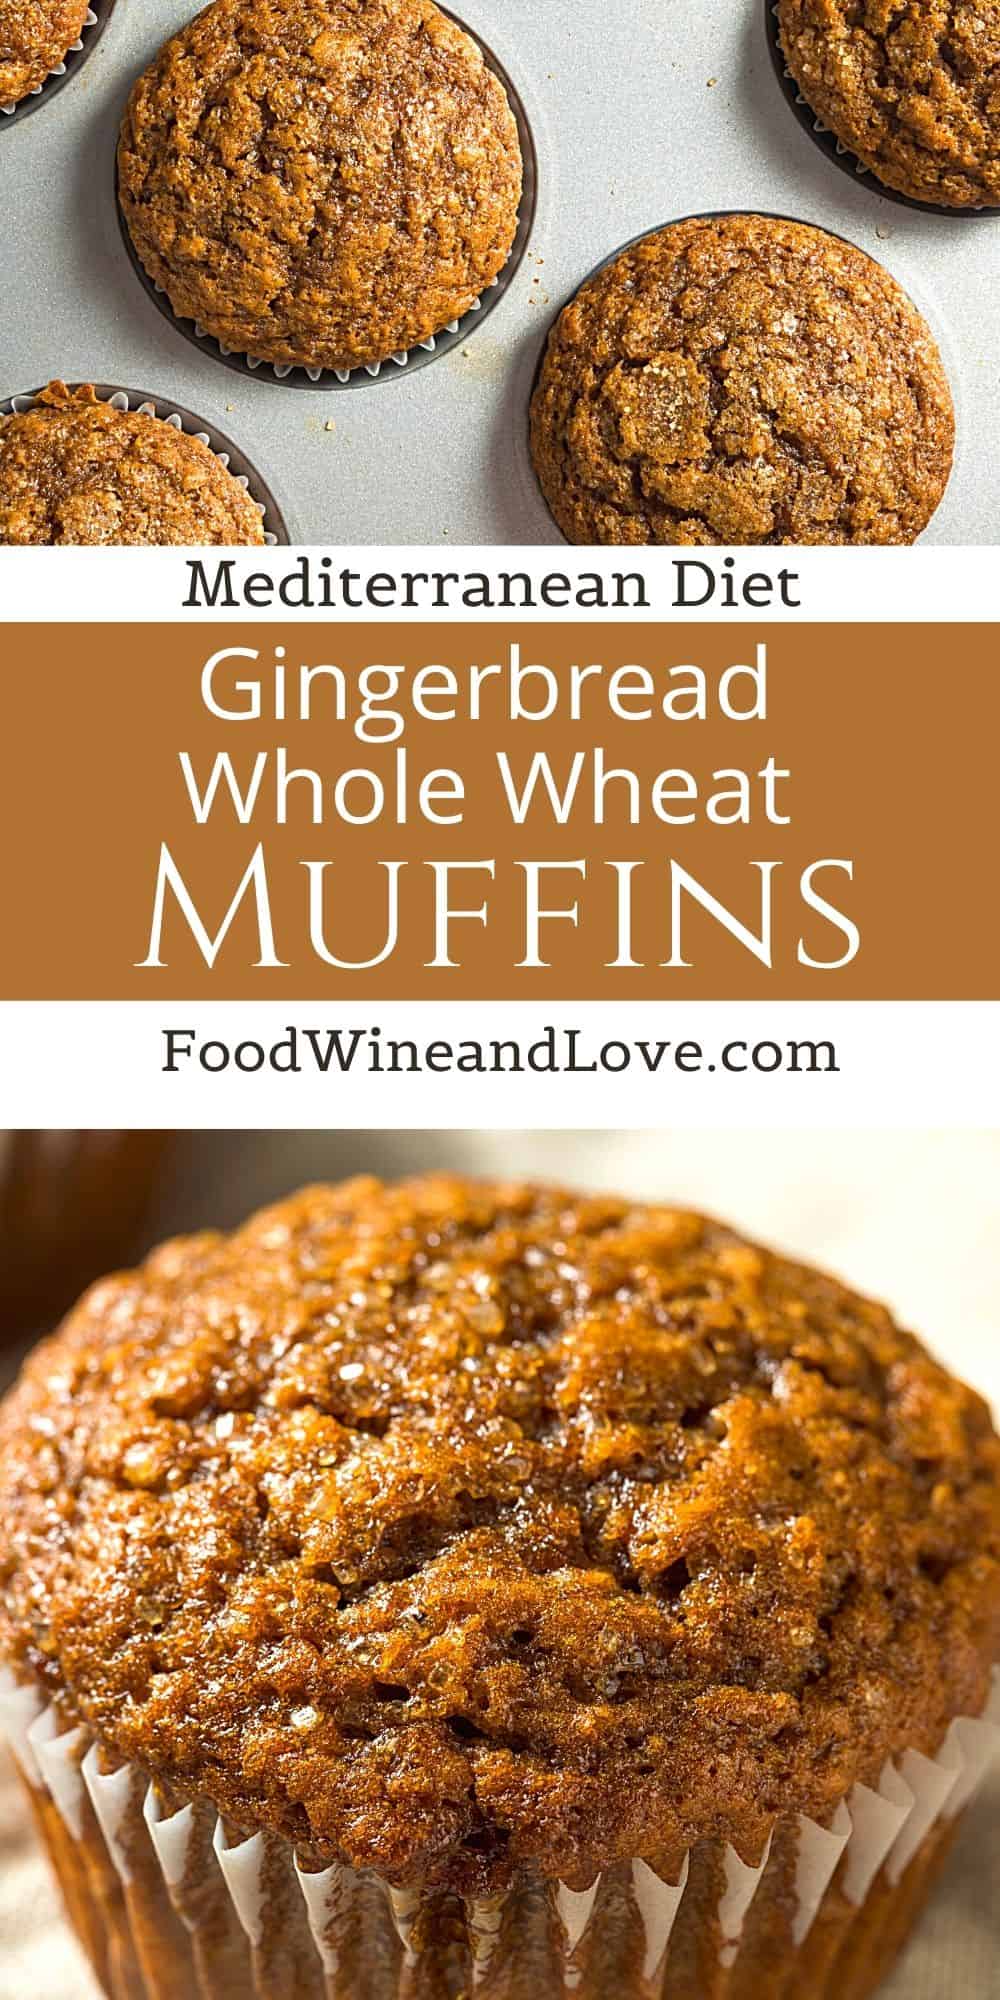 Gingerbread Whole Wheat Muffins